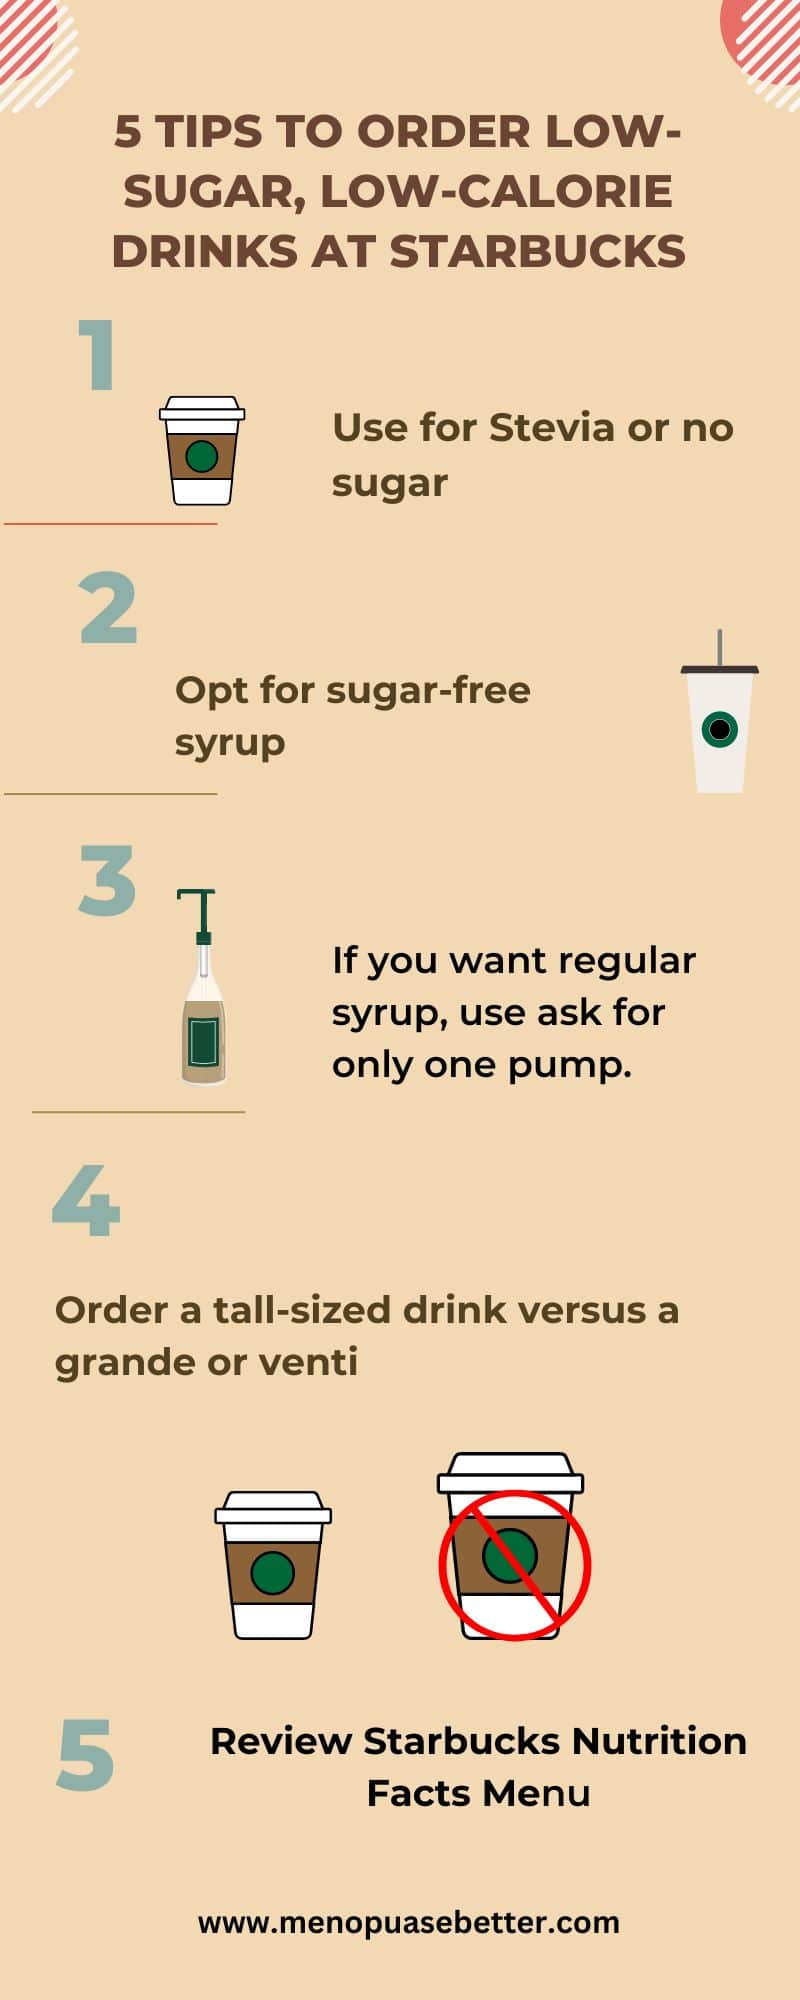 Tips for ordering low sugar, low calorie drinks at starbucks 